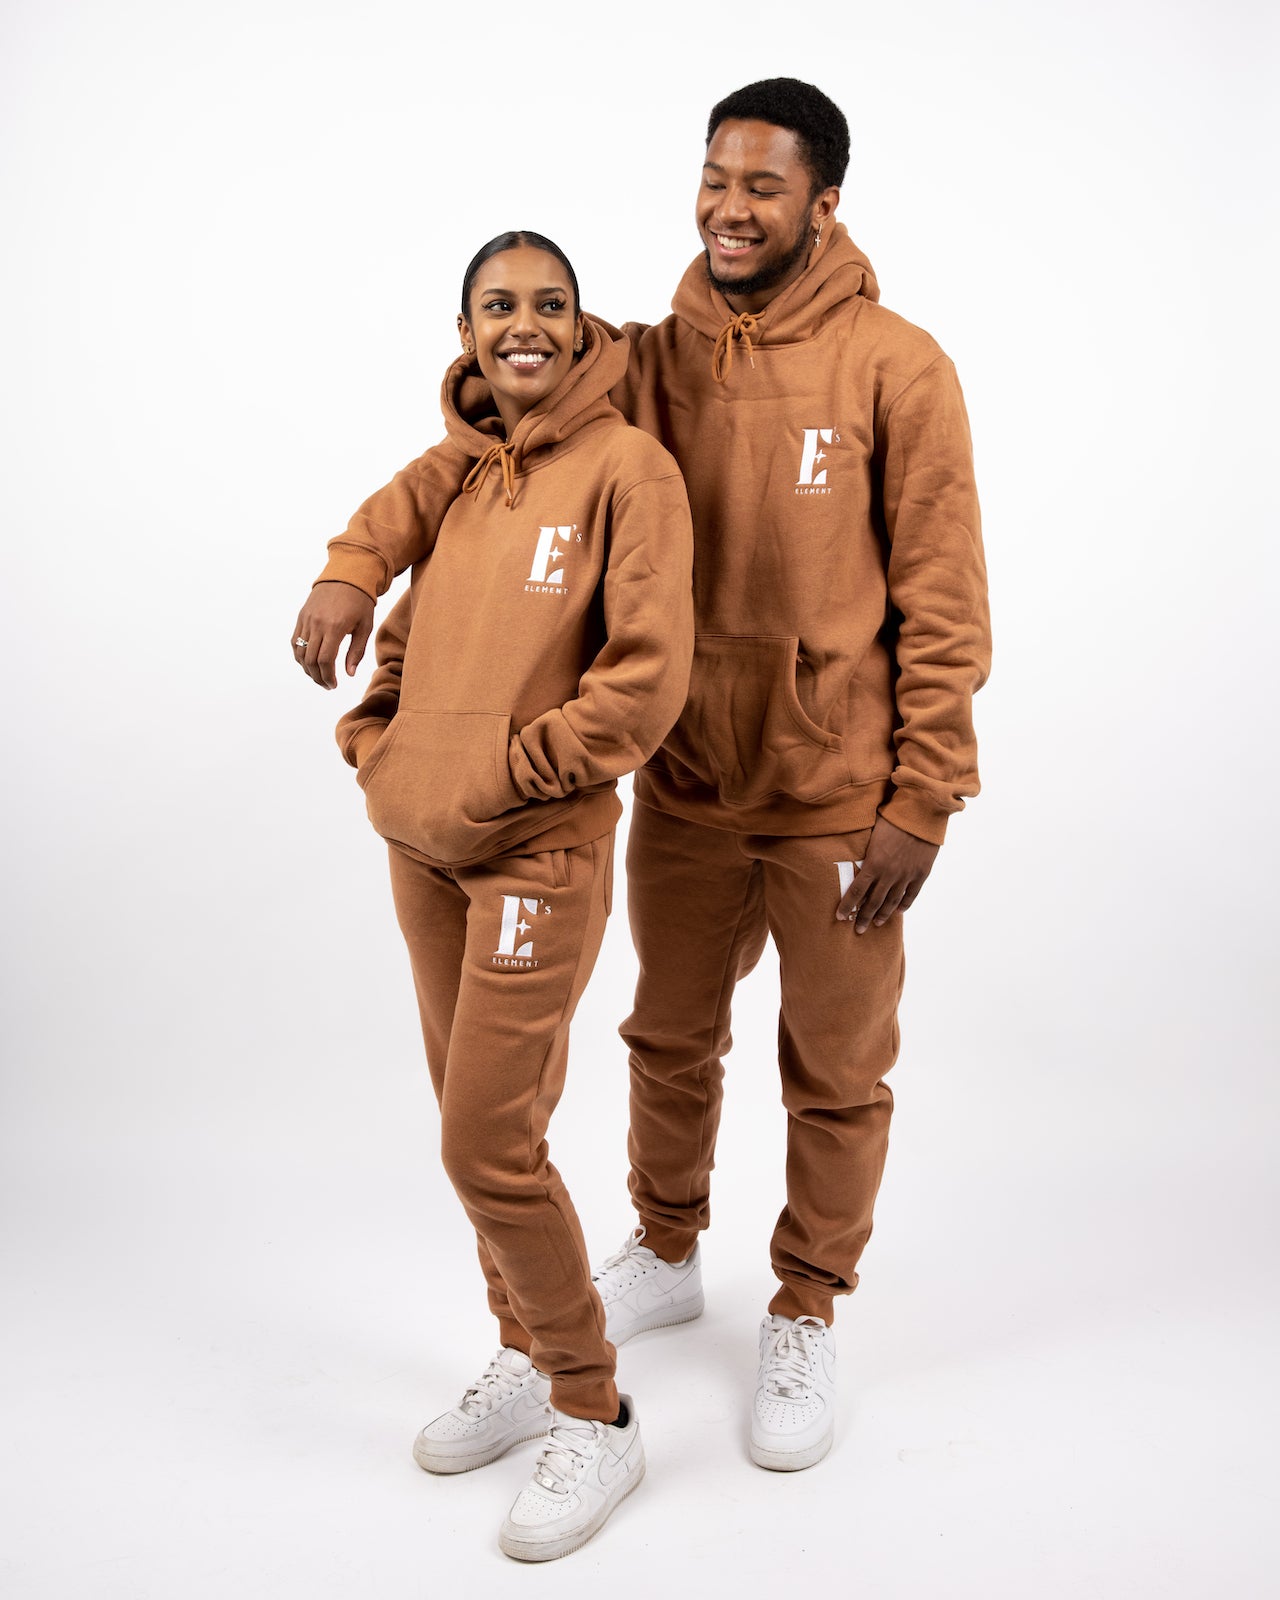 Shop Sweatsuit Collection, Hoodies and Sweatpants